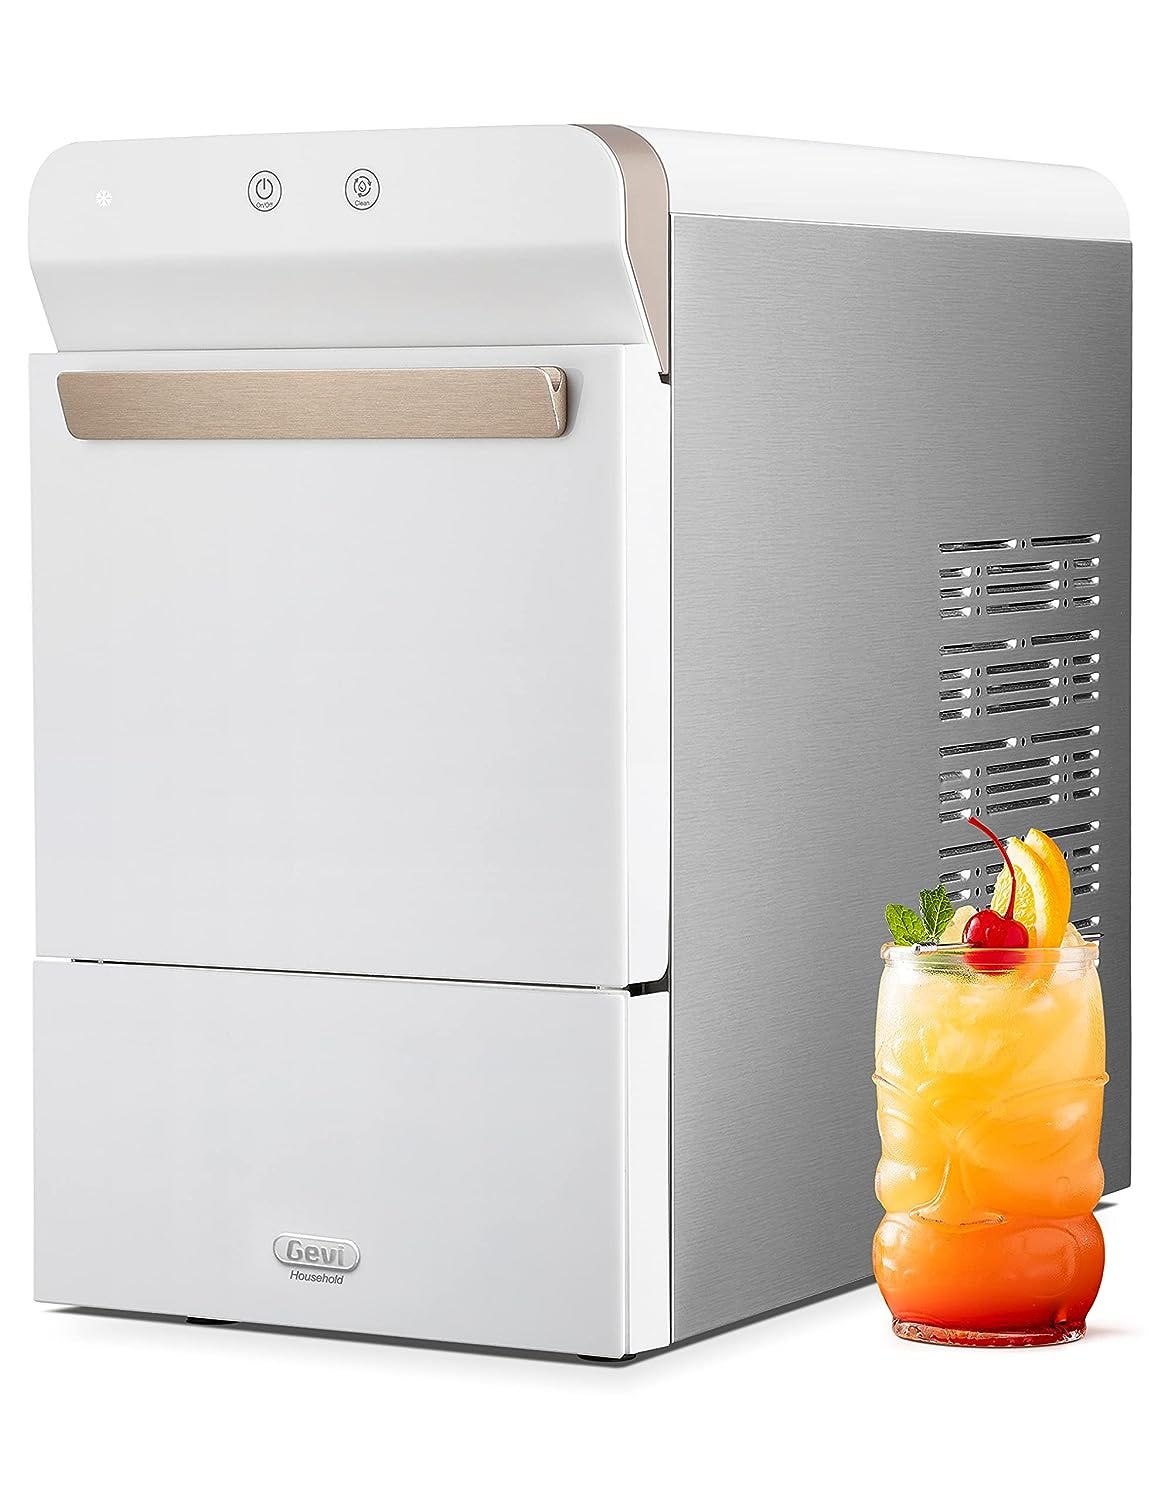 3 Reasons Why The Gevi Ice Maker Is A Summer Essential — BLOSSOMING  INTERIORS BLOG